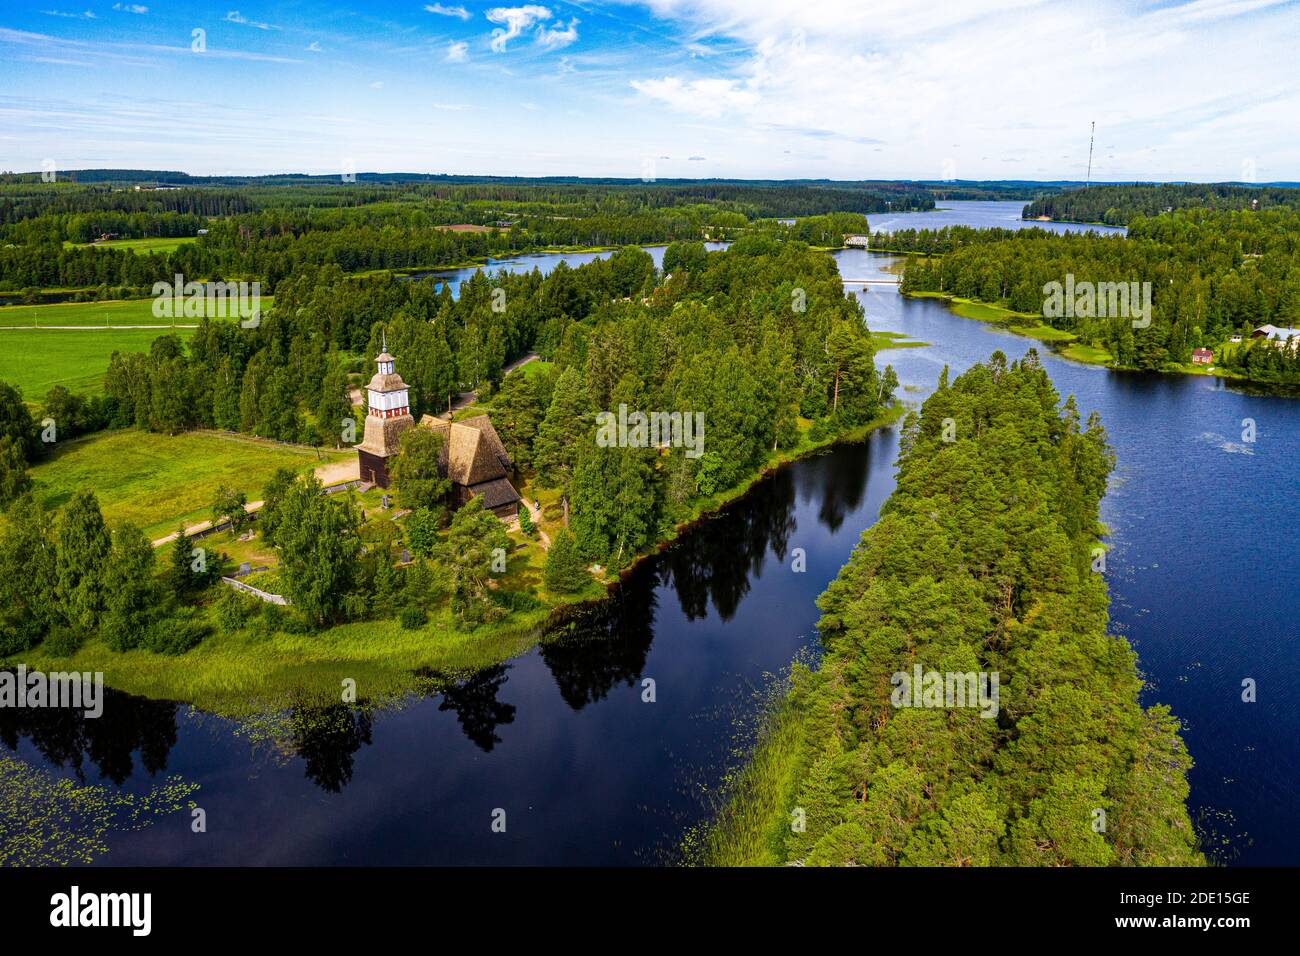 Aerial view of Petaejeveden (Petajavesi) including the Old Church, UNESCO World Heritage Site, Finland, Europe Stock Photo